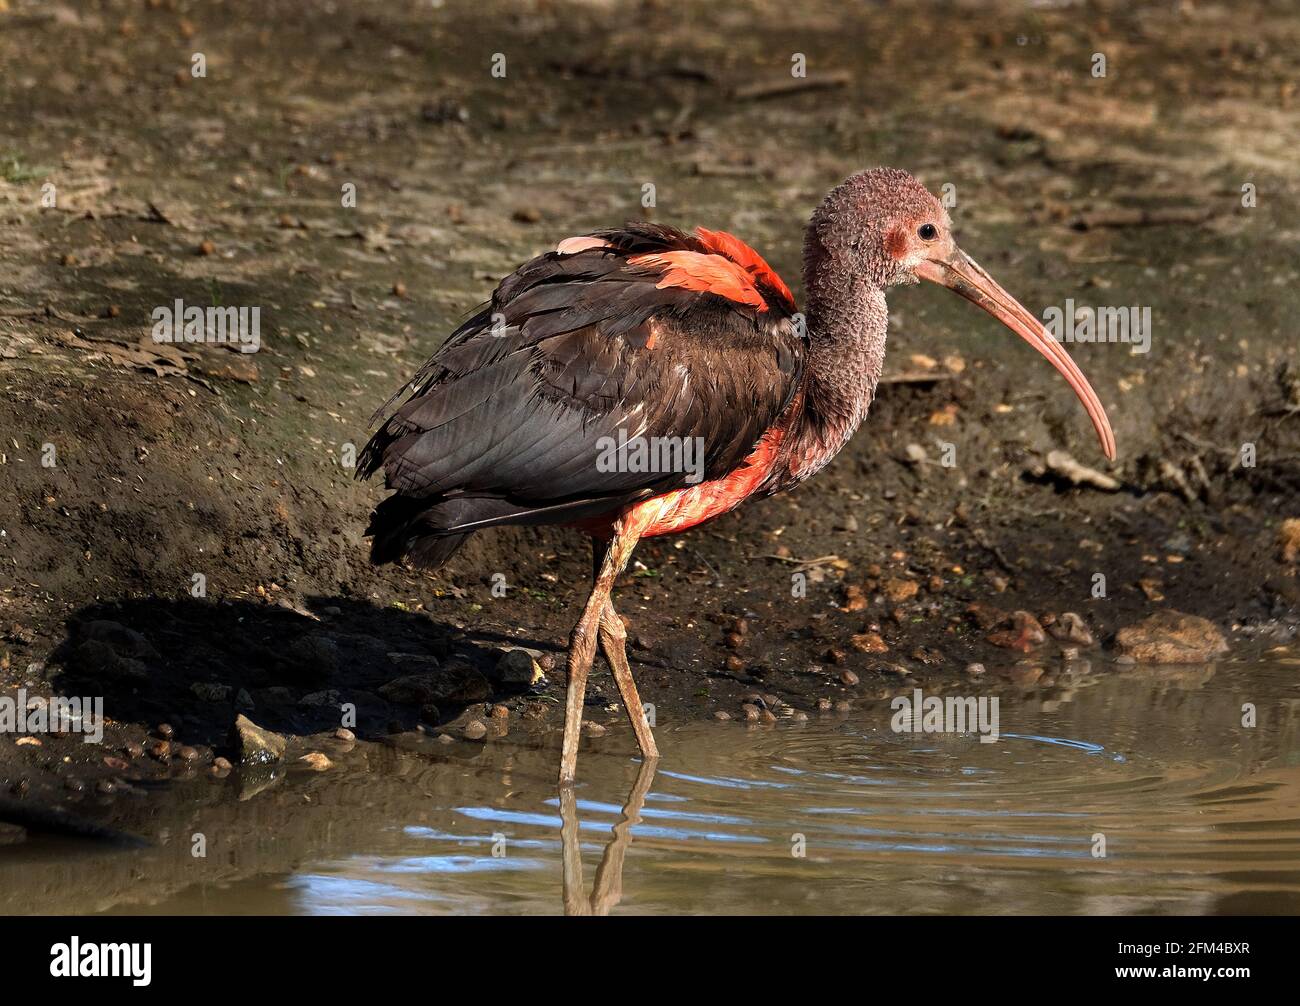 The scarlet ibis is a species of ibis in the bird family Threskiornithidae. It inhabits tropical South America and part of the Caribbean. Young bird. Stock Photo